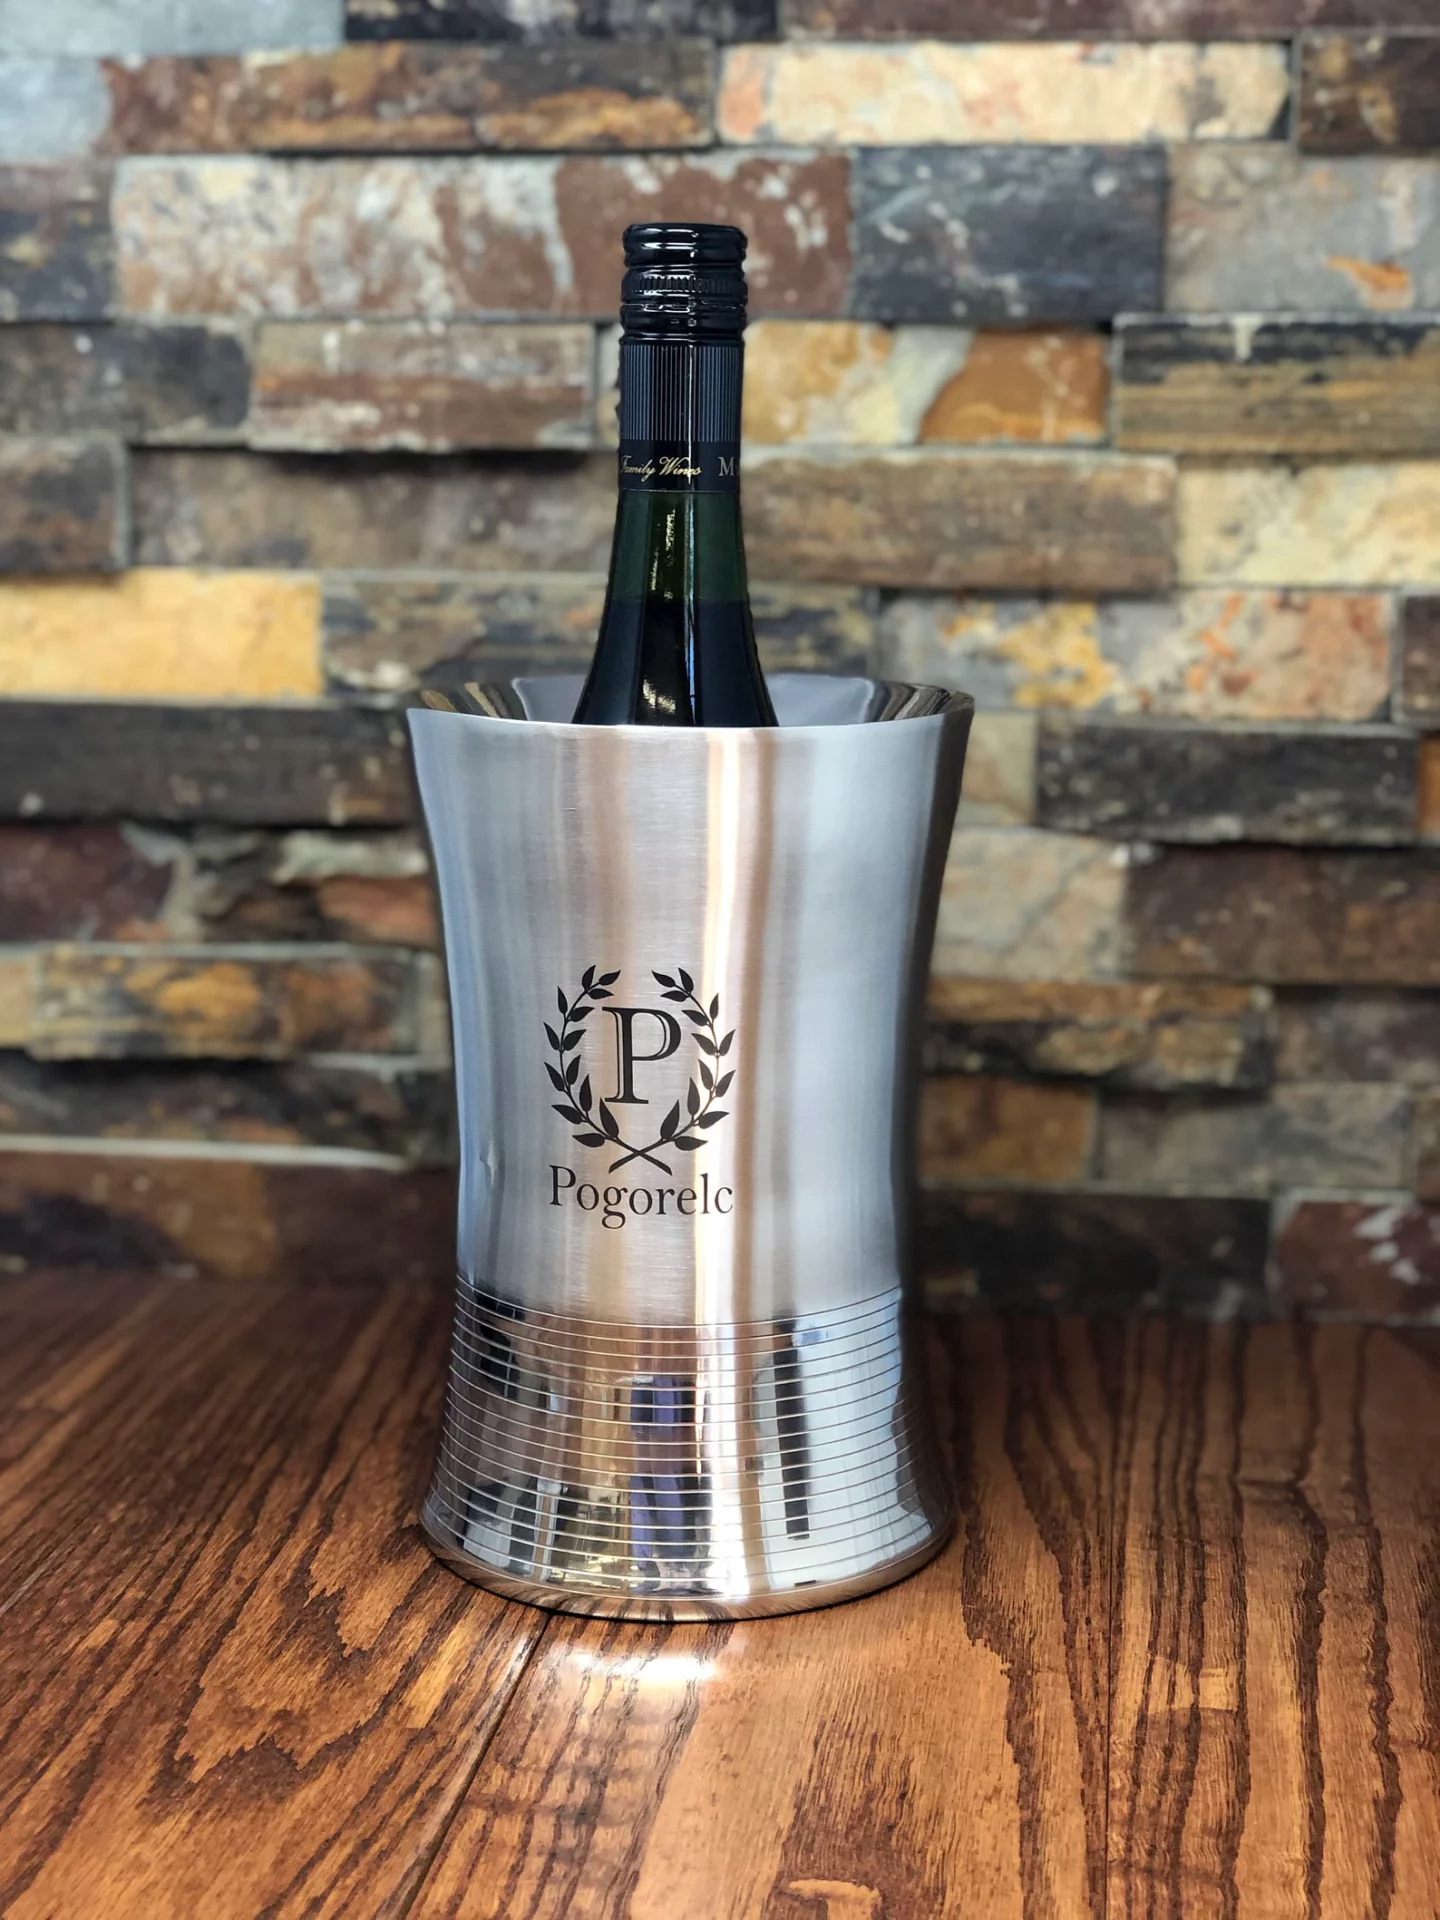 Stainless steel wine chiller holding a bottle of wine on a wooded table top and stone background